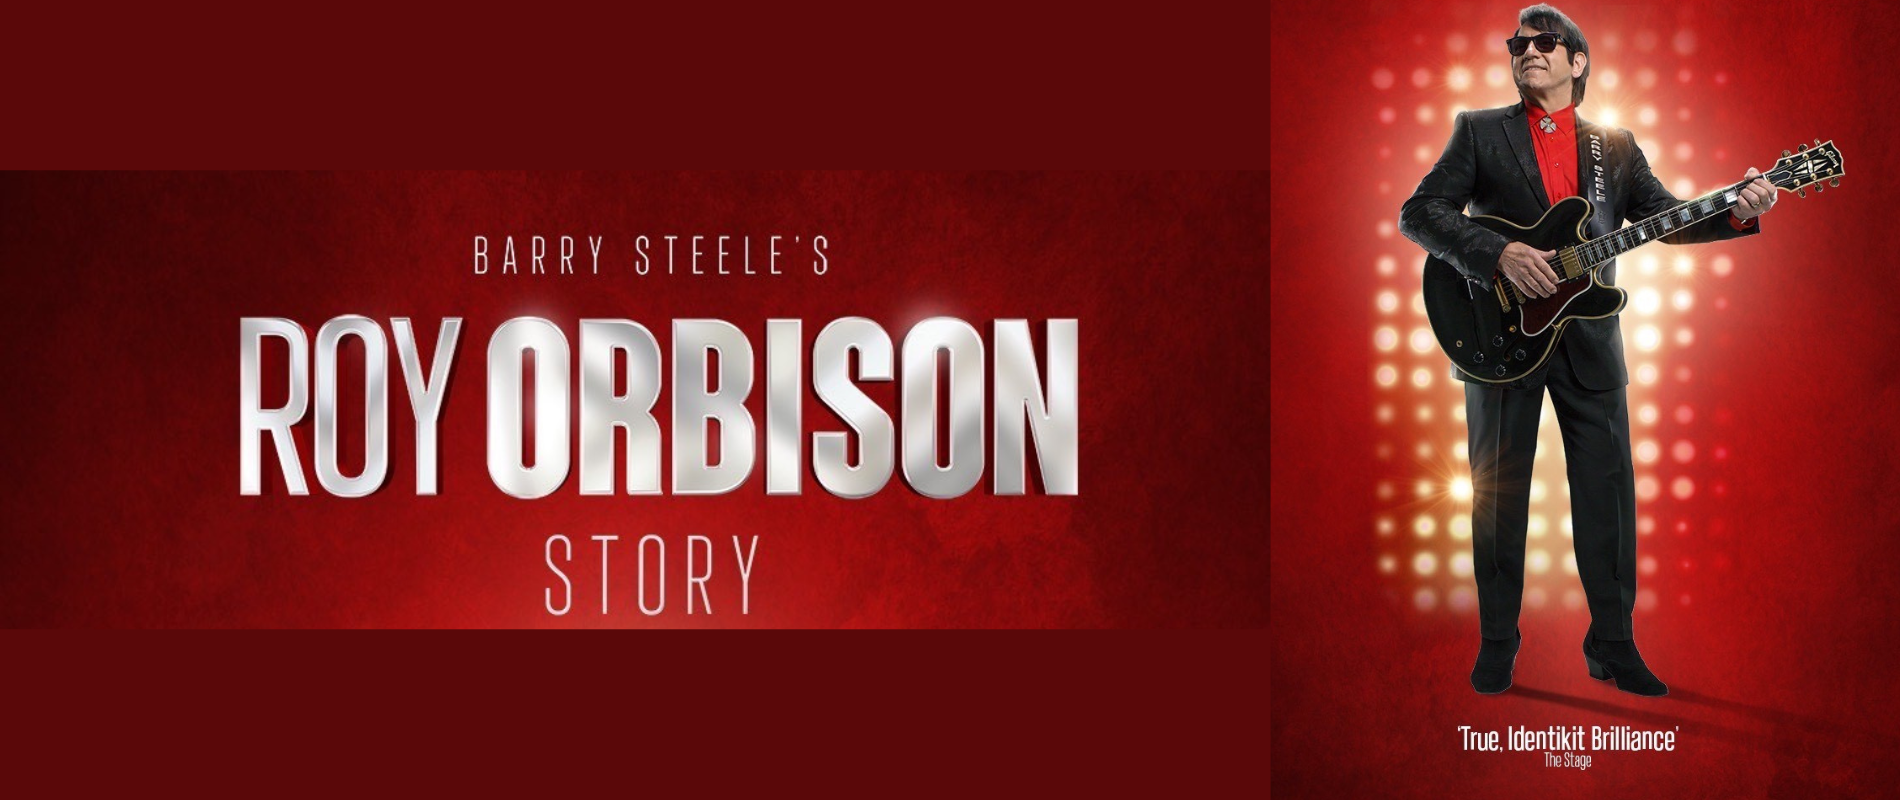 Barry Steele Presents: The Roy Orbison Story